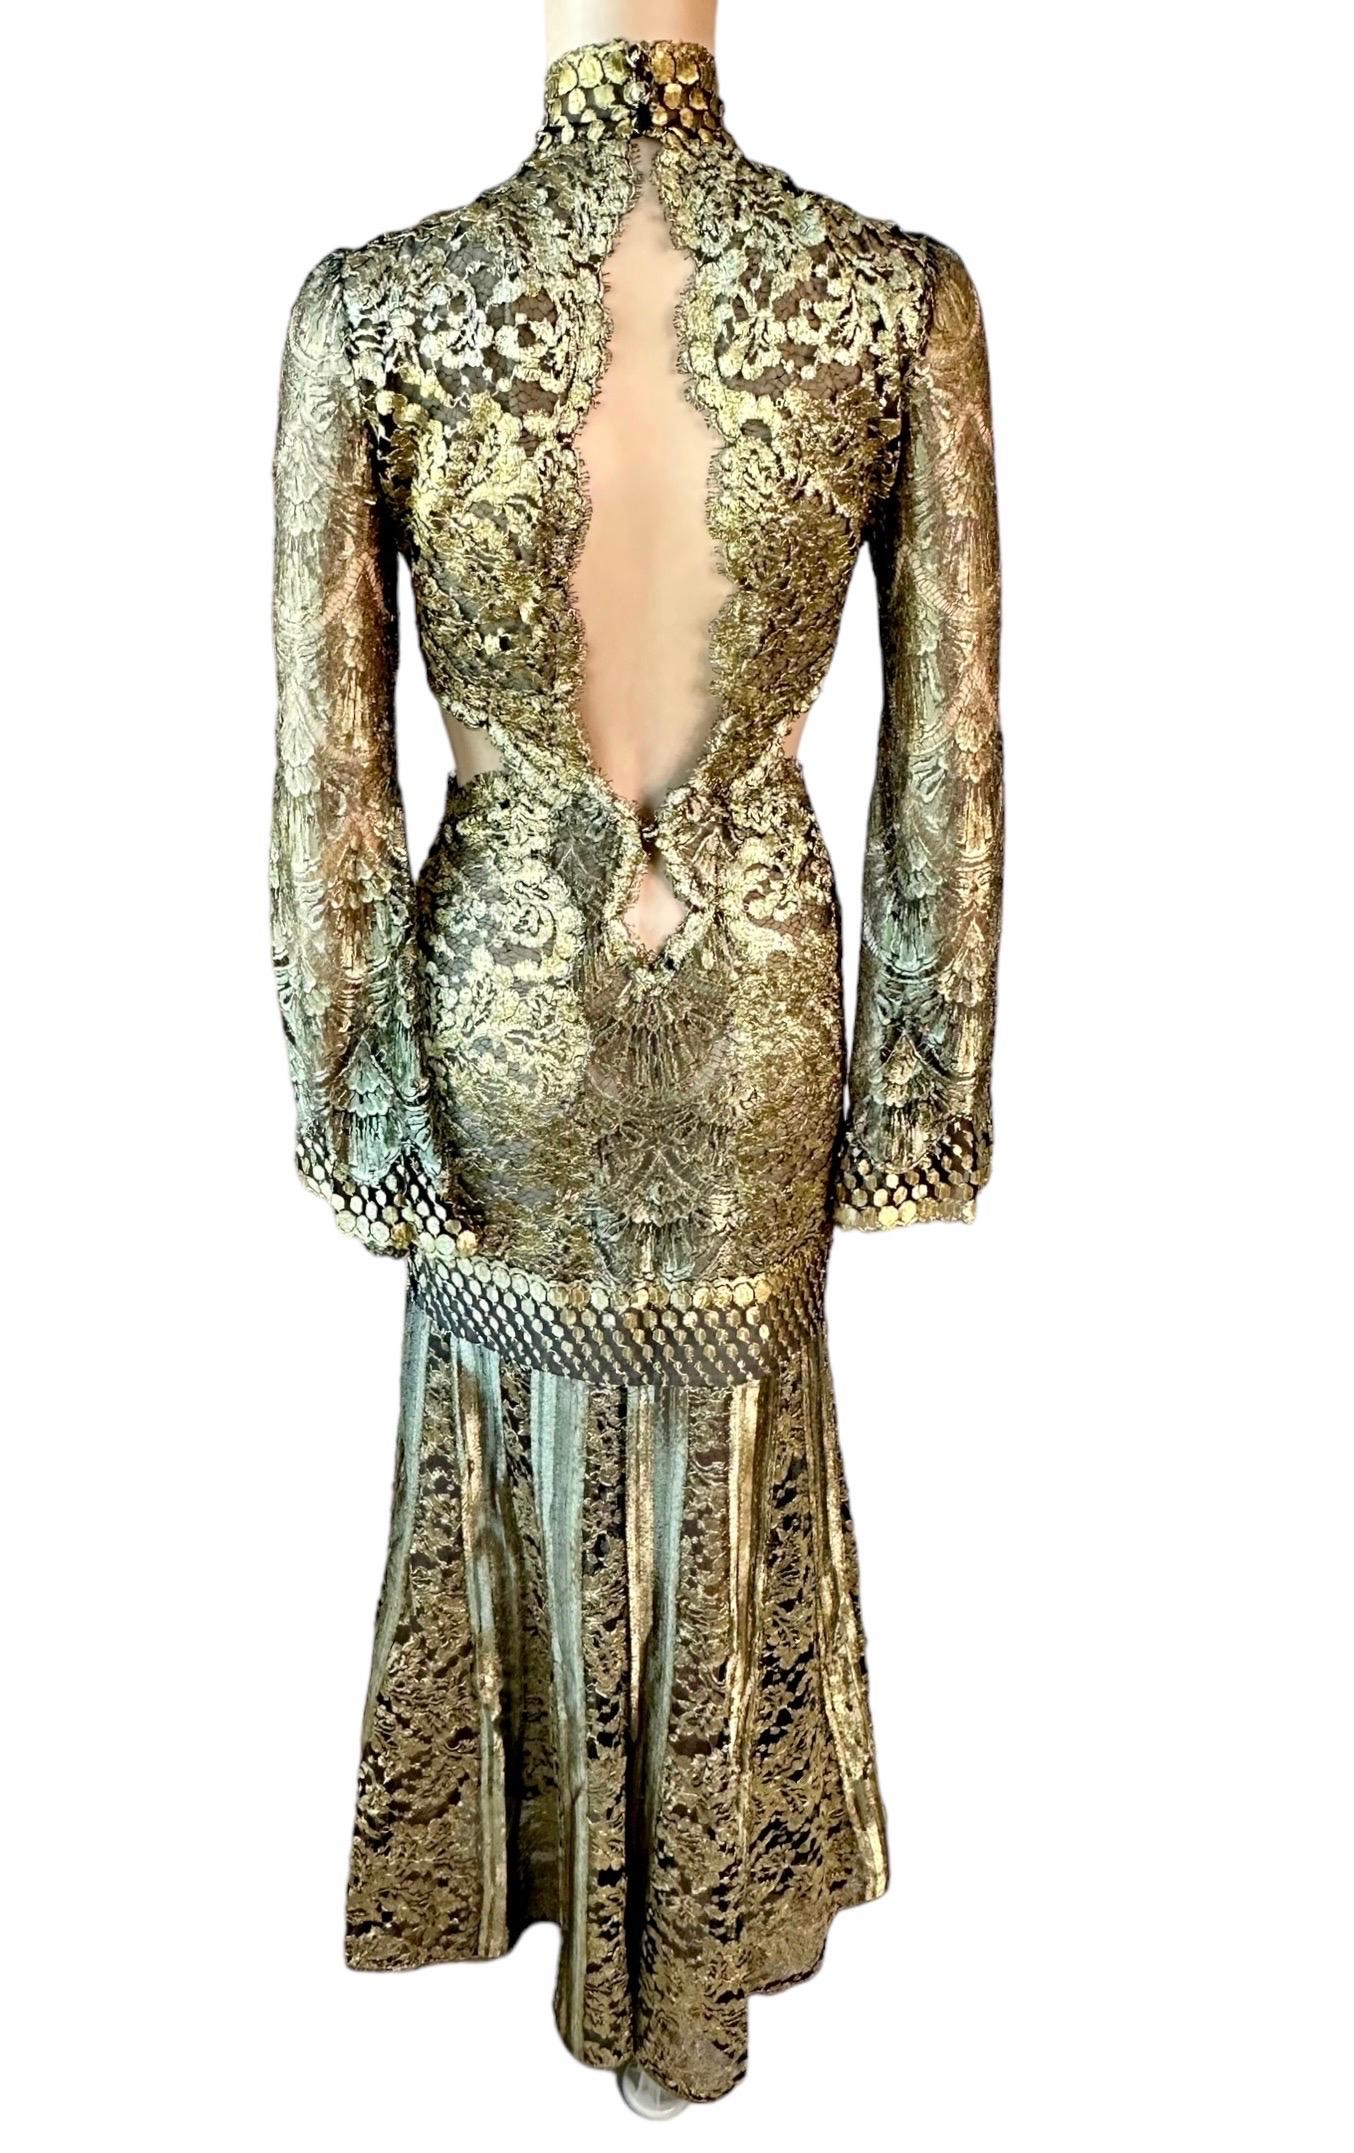 Roberto Cavalli F/W 2016 Runway Gold Sheer Lace Evening Dress Gown For Sale 5